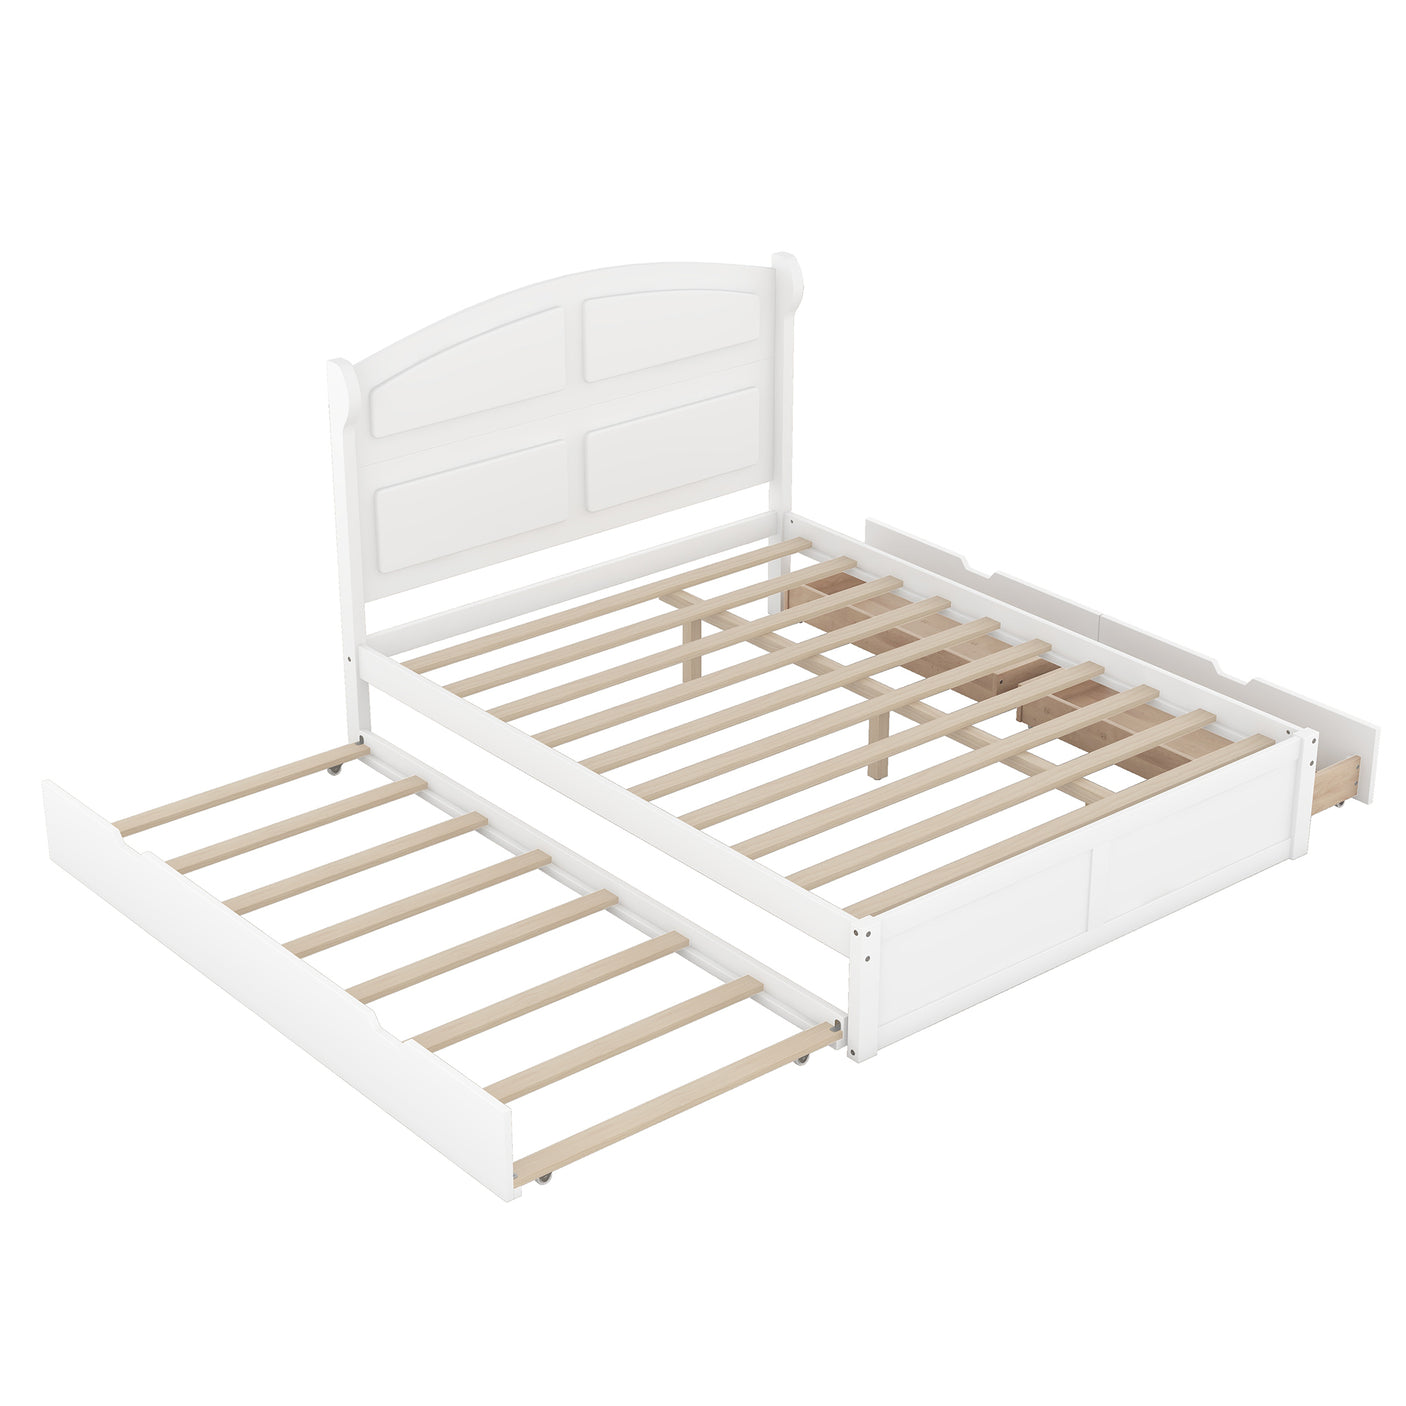 Wood Queen Size Platform Bed with Twin Size Trundle and 2 Drawers, White(Expected Arrival Time: 9.2)